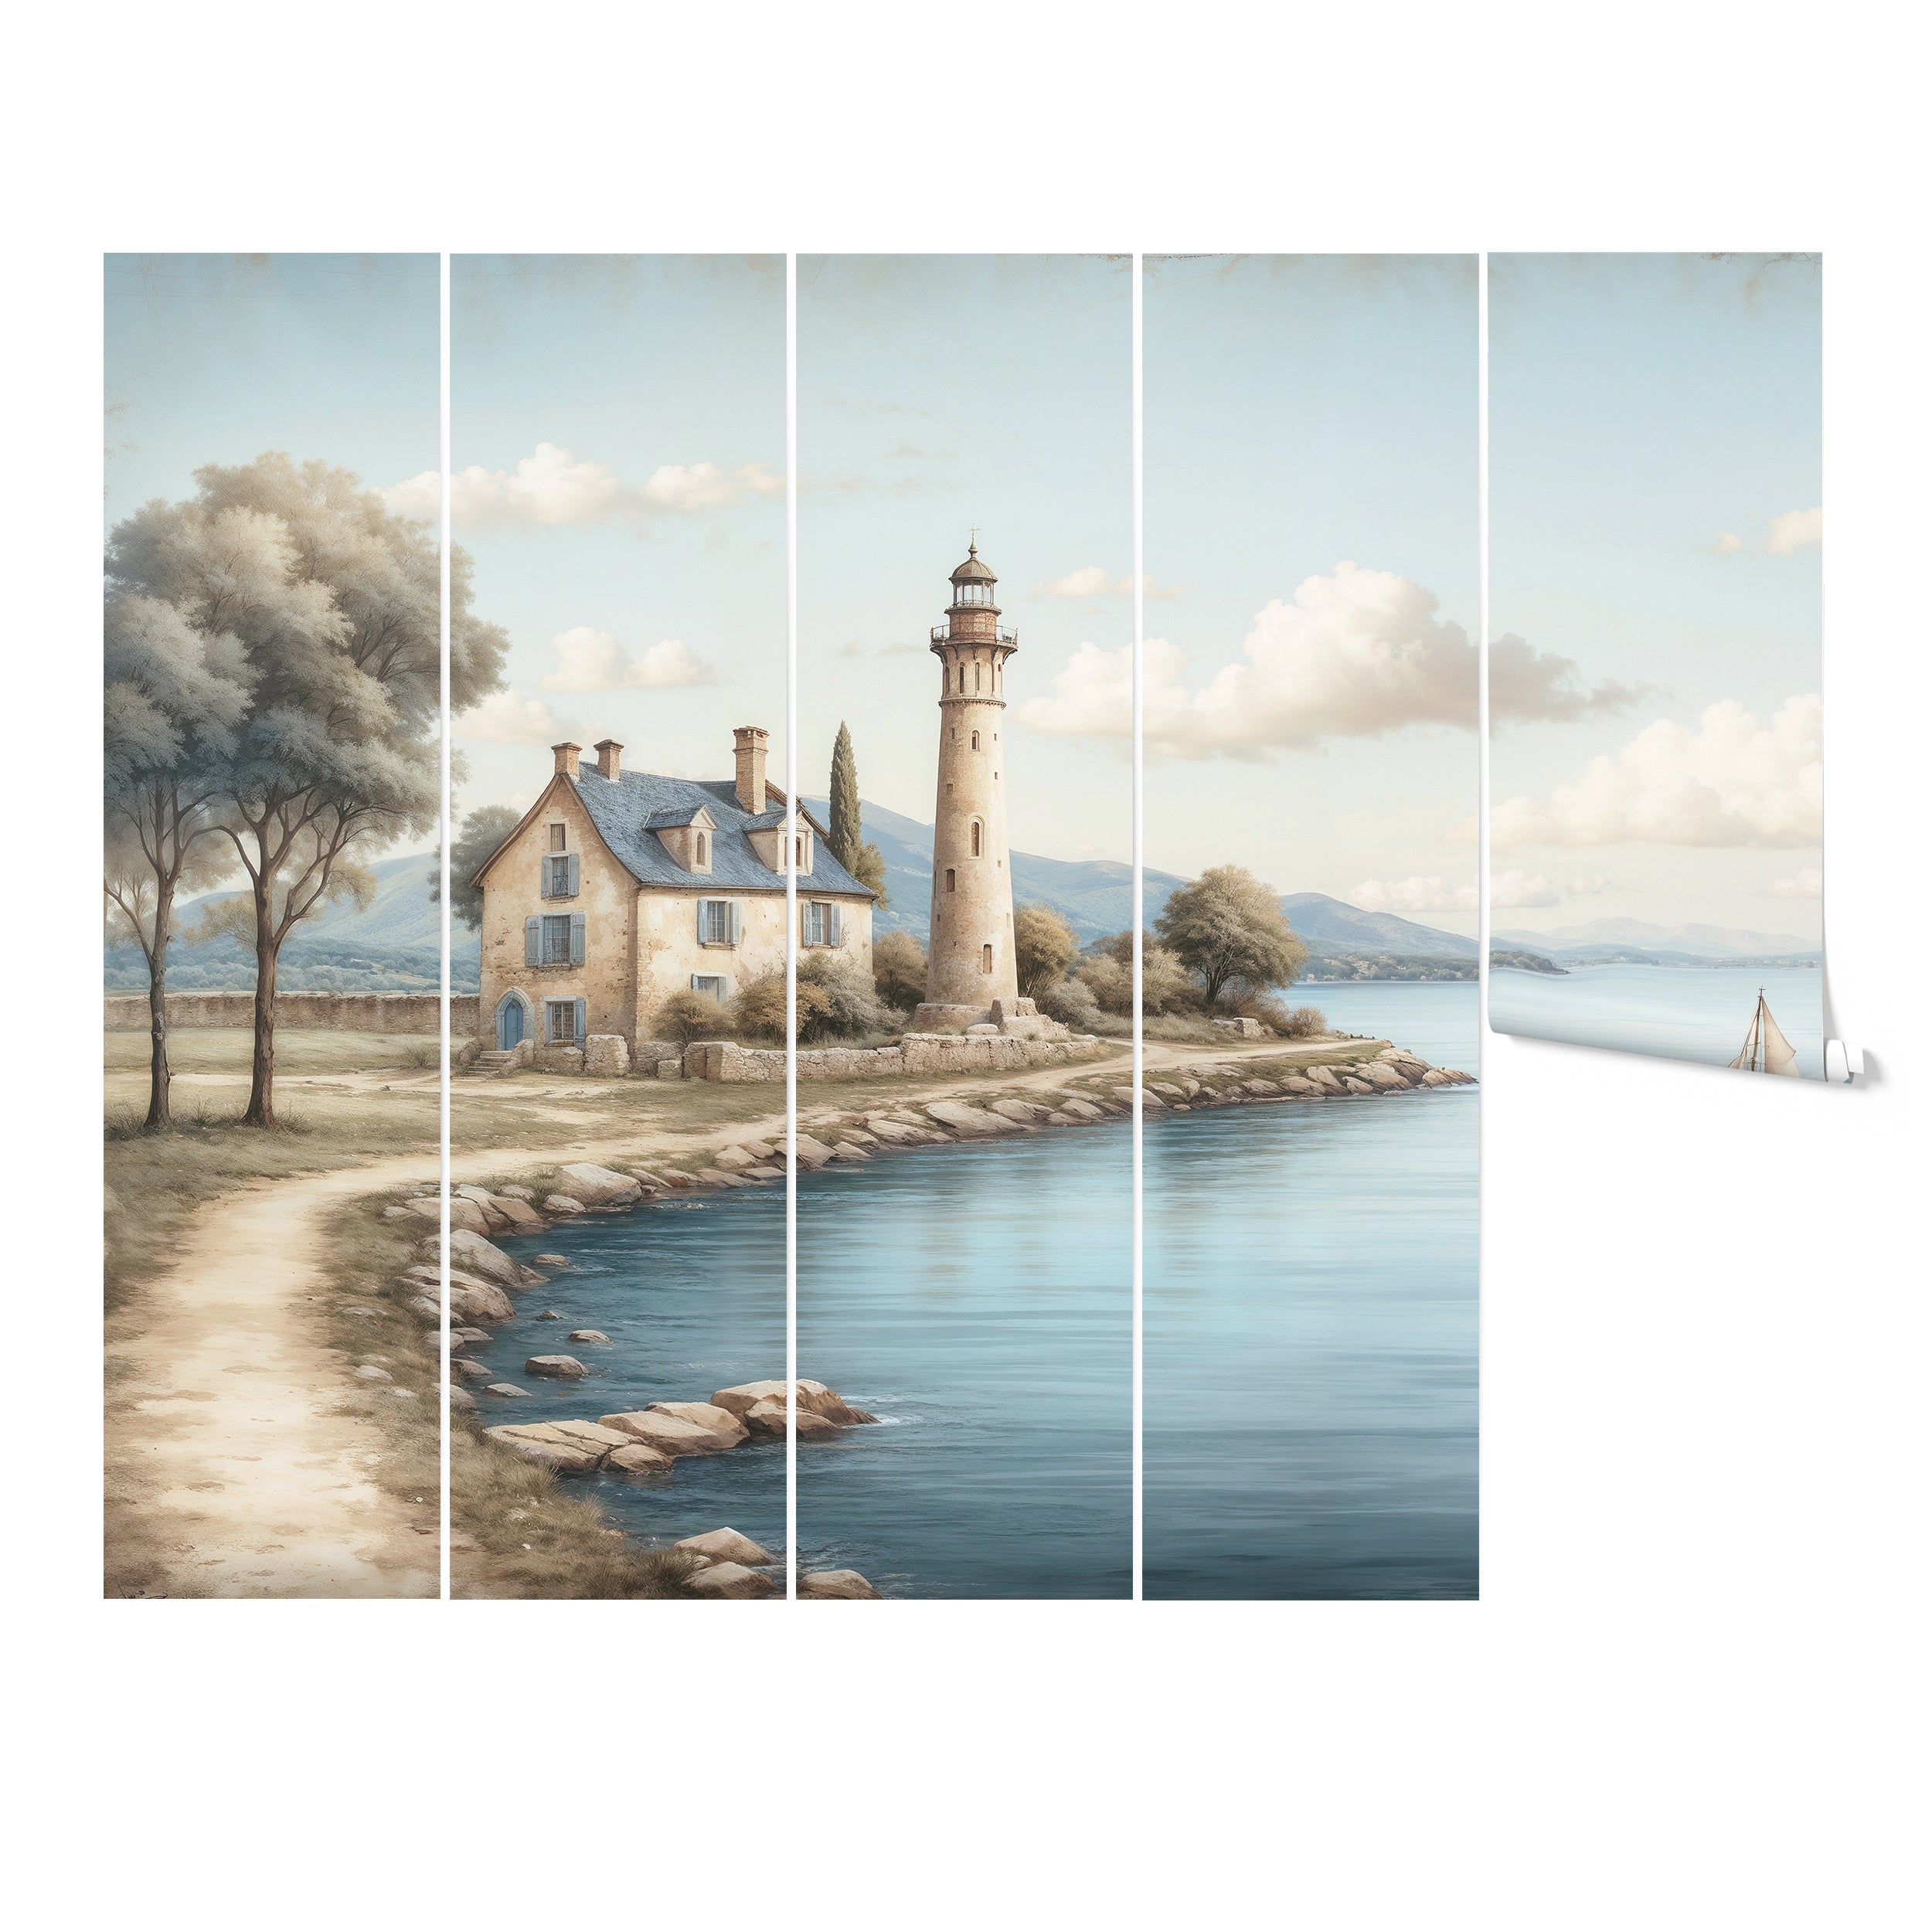 "Storybook-style wallpaper featuring a serene lakeshore scene with a lighthouse and sailing boats."